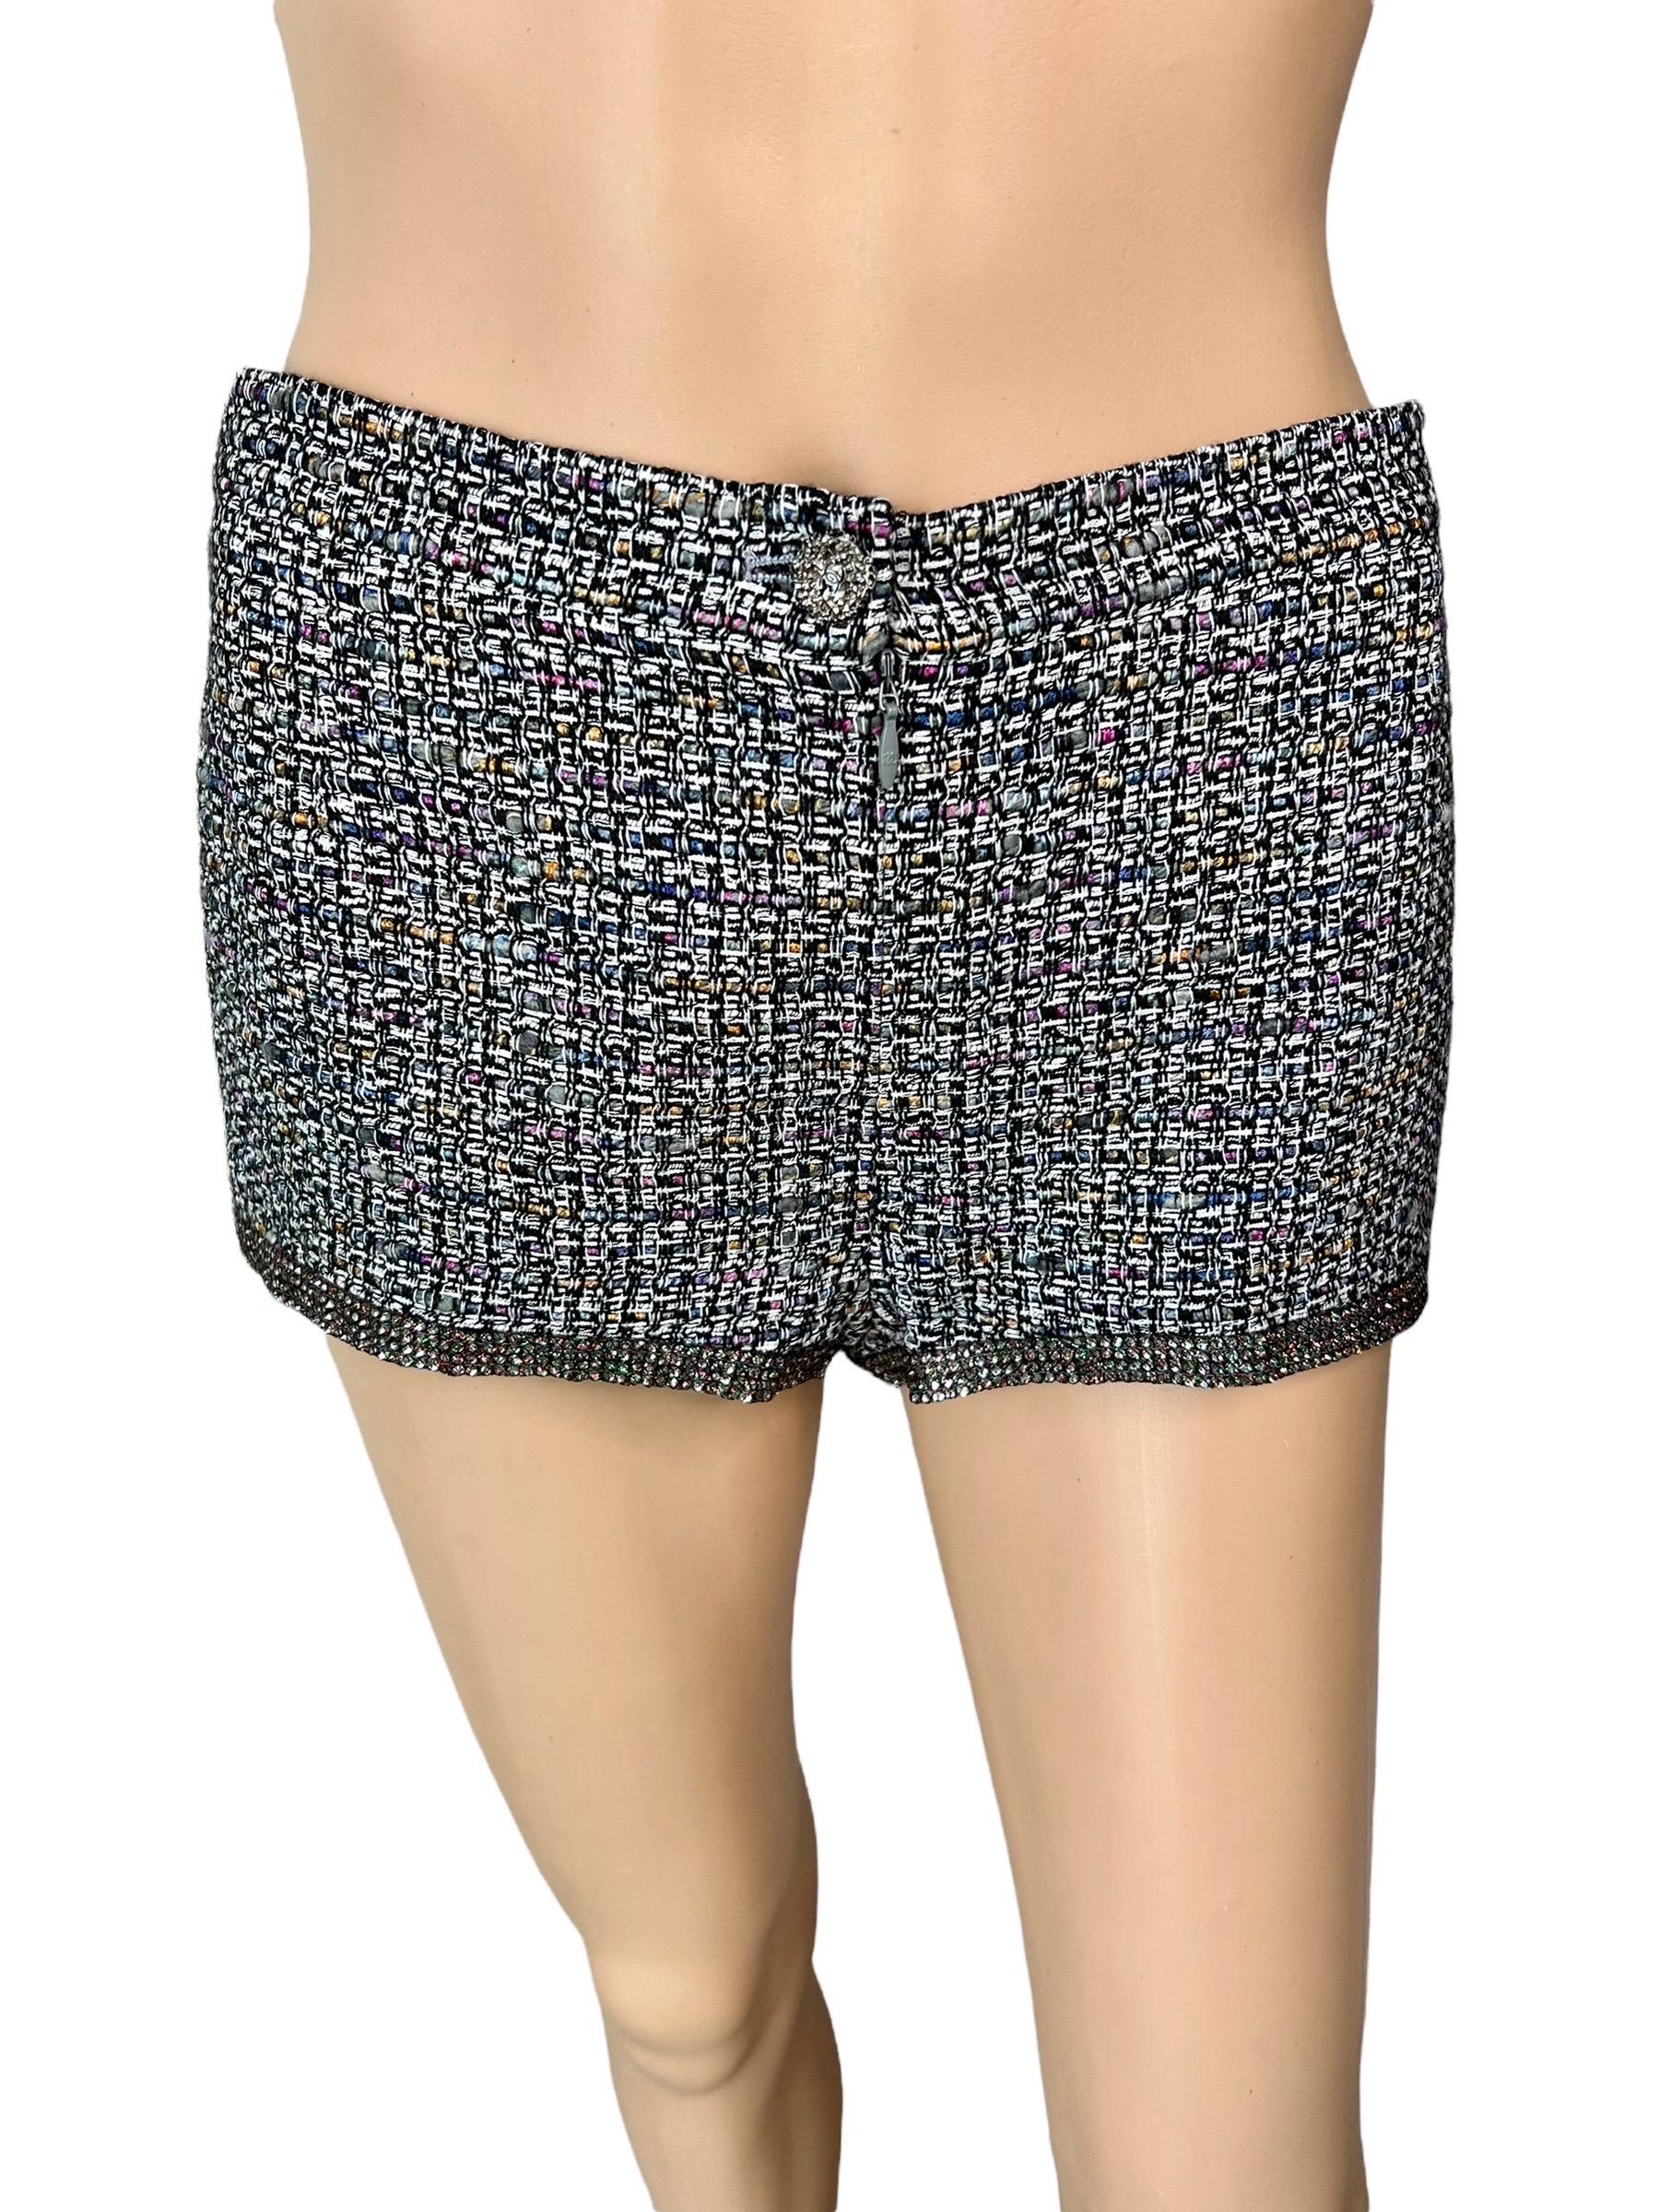 Chanel S/S 2011 Runway CC Logo Crystal Embellished Mini Shorts Size FR 38

Look 26 from the Spring 2011 Runway. Heather grey and multicolor Chanel mini tweed shorts with Strass crystal trim throughout and concealed zip featuring interlocking CC